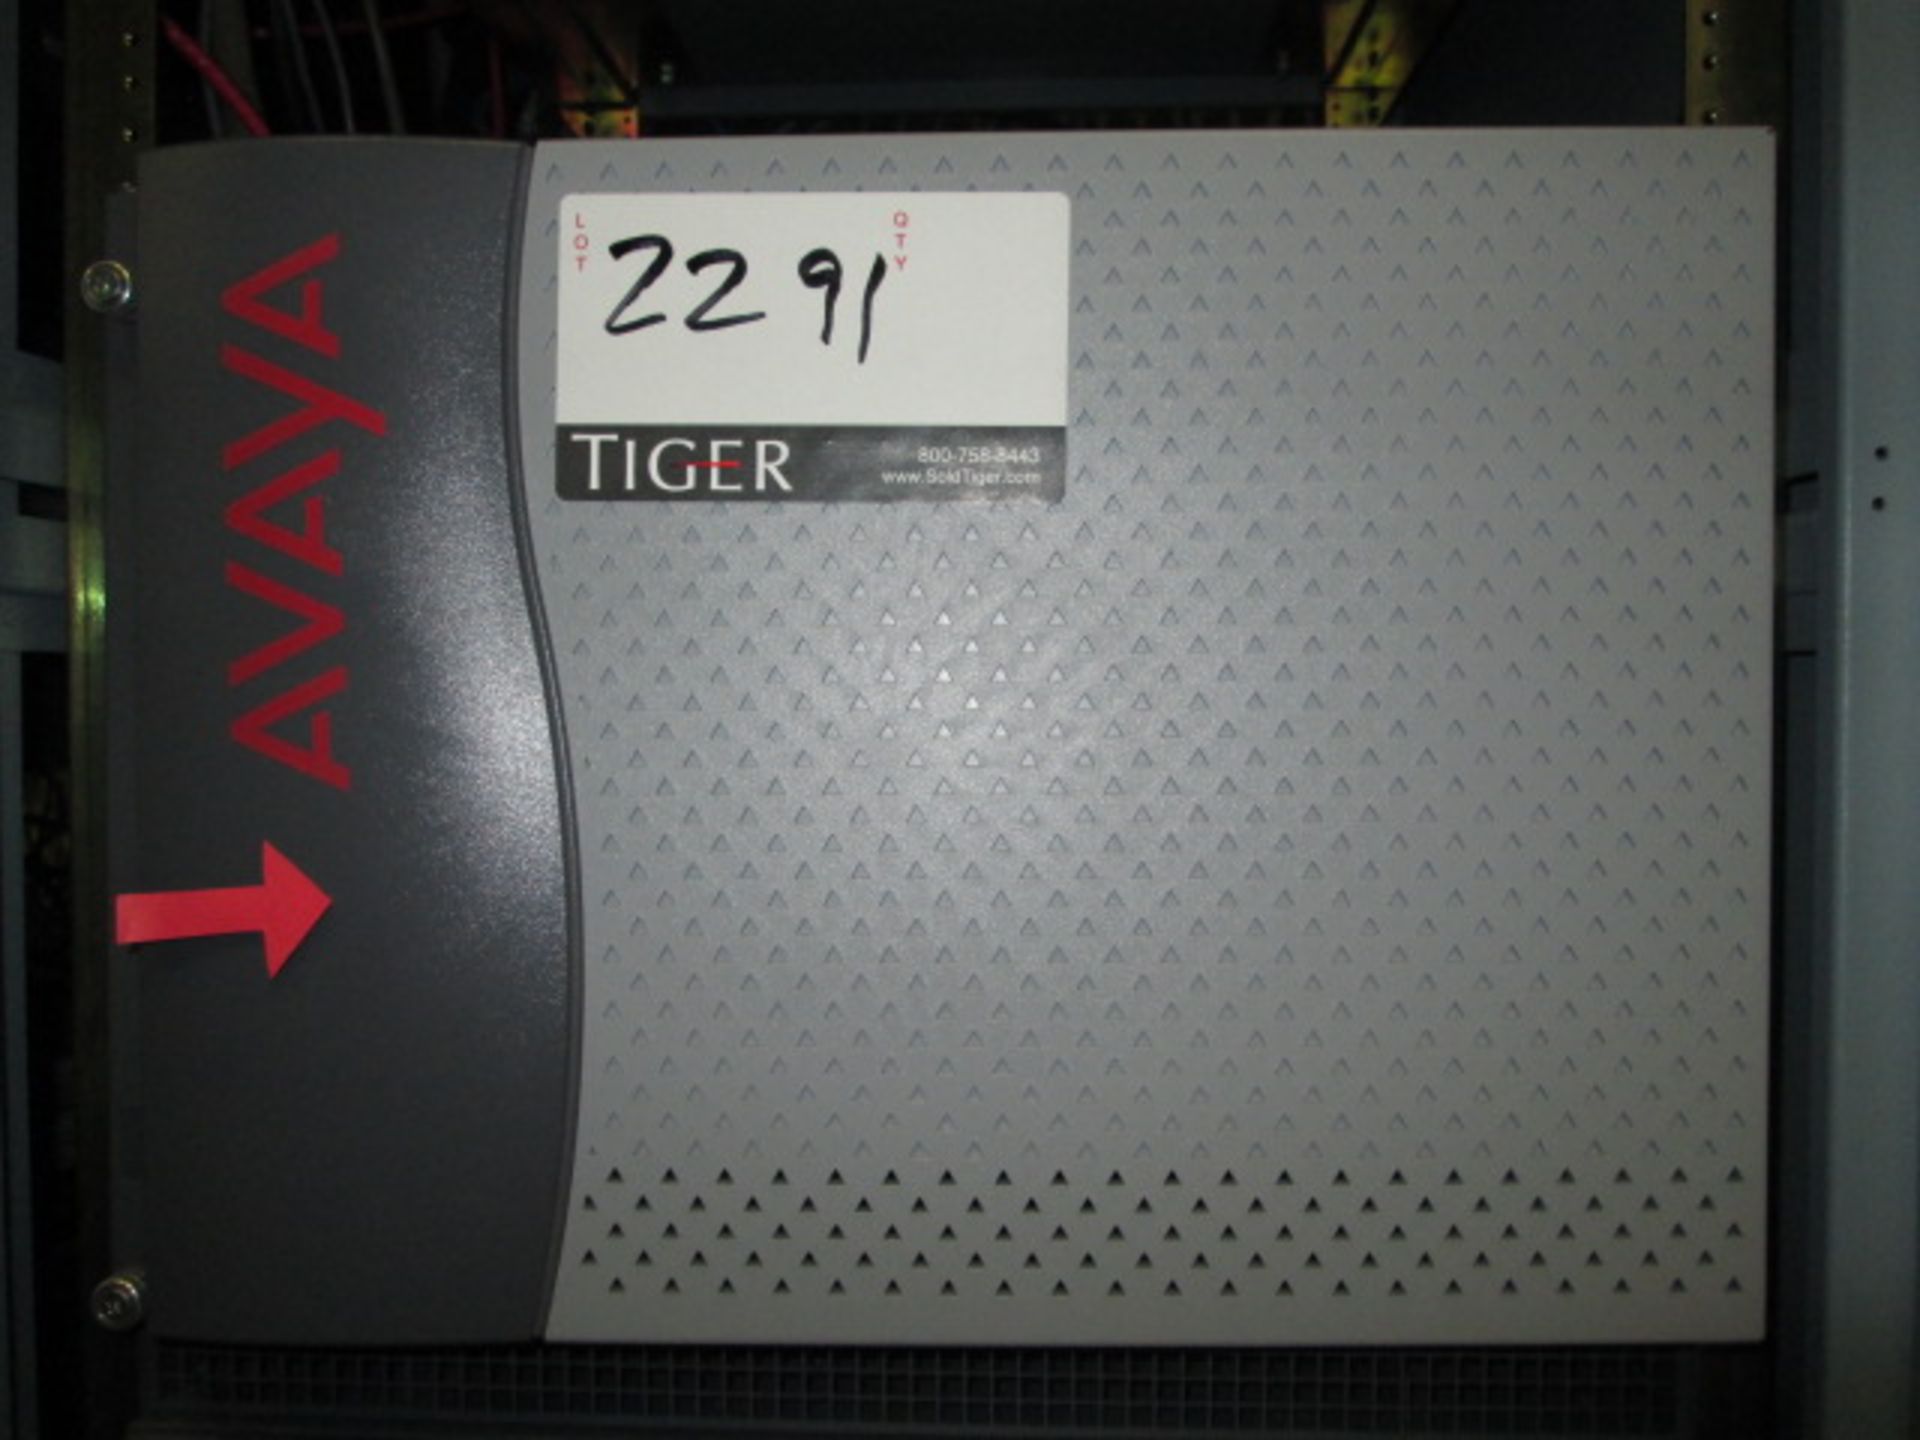 Avaya G650 Media Gateway 8U High 14 Slot Chassis. **PLEASE NOTE: Only Available for Pickup on 9/24 &